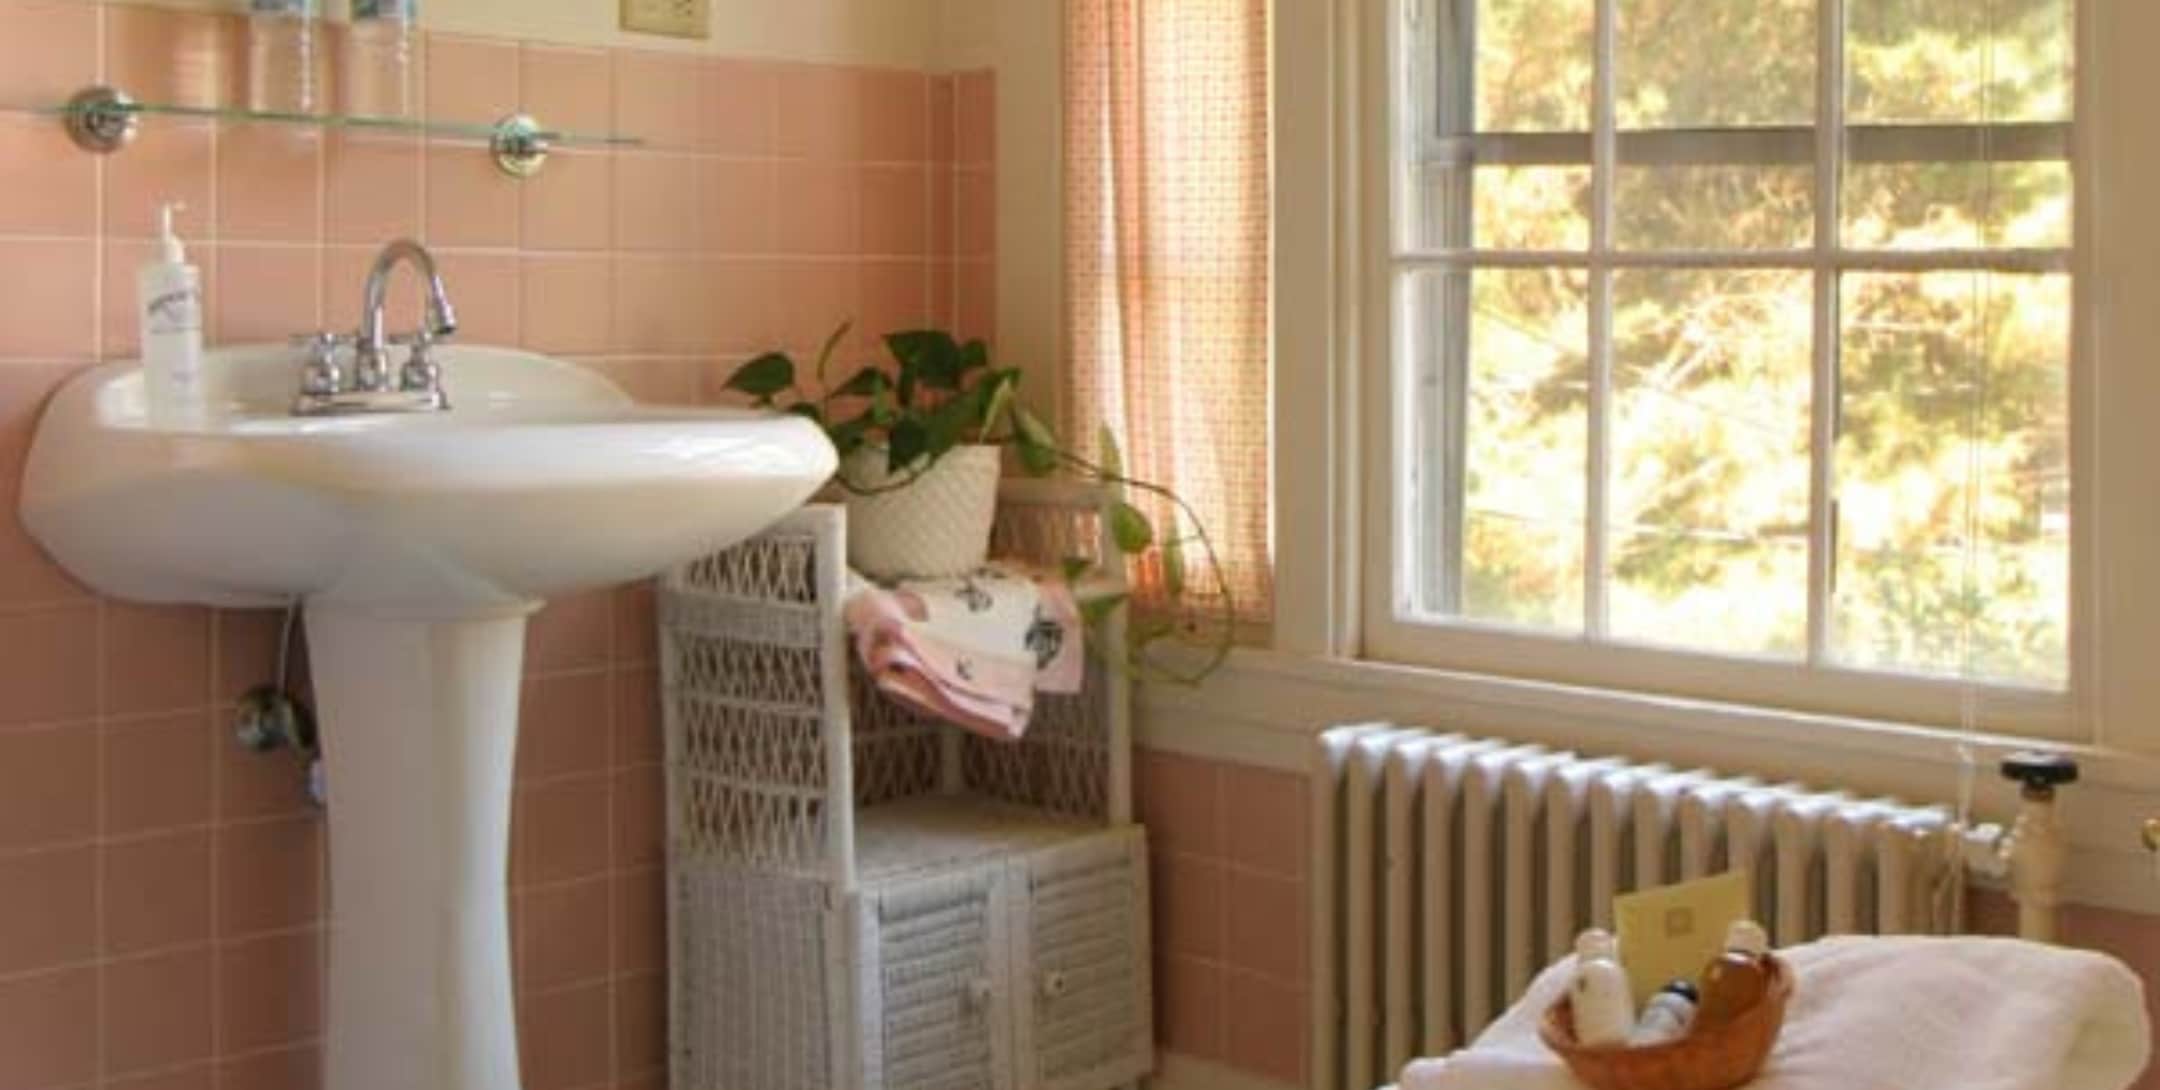 Poppy's bathroom with beige walls, pink tile, white pedestal sink and large window with sheer valance.